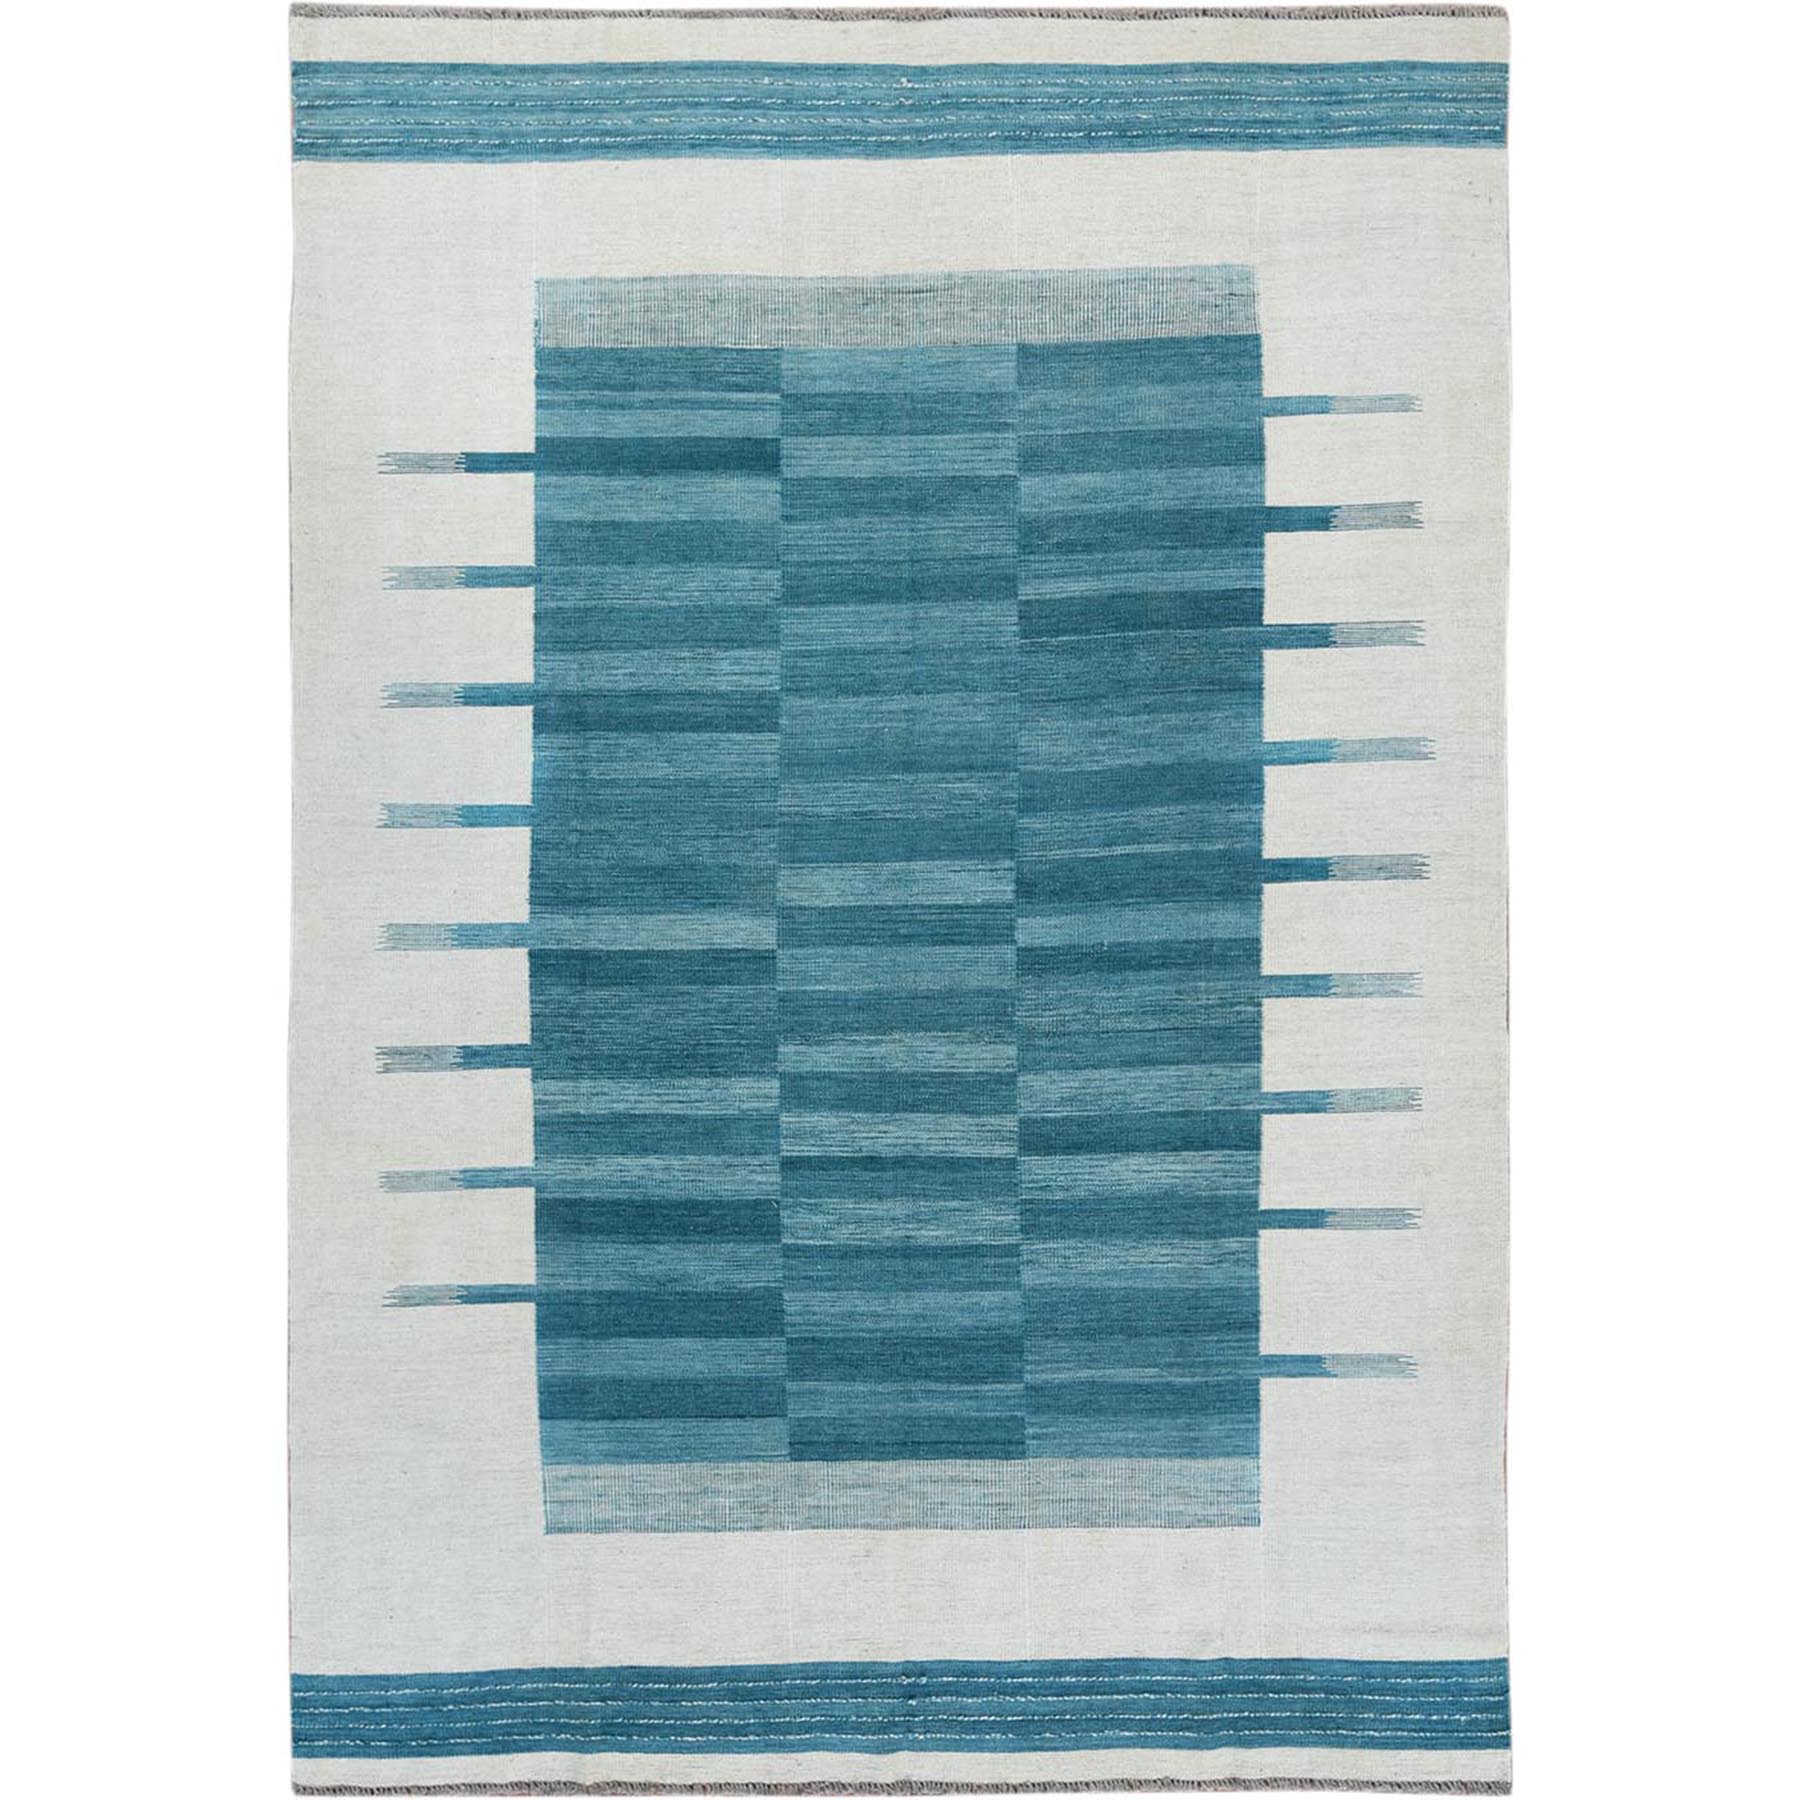 Modern & Contemporary Wool Hand-Woven Area Rug 6'4